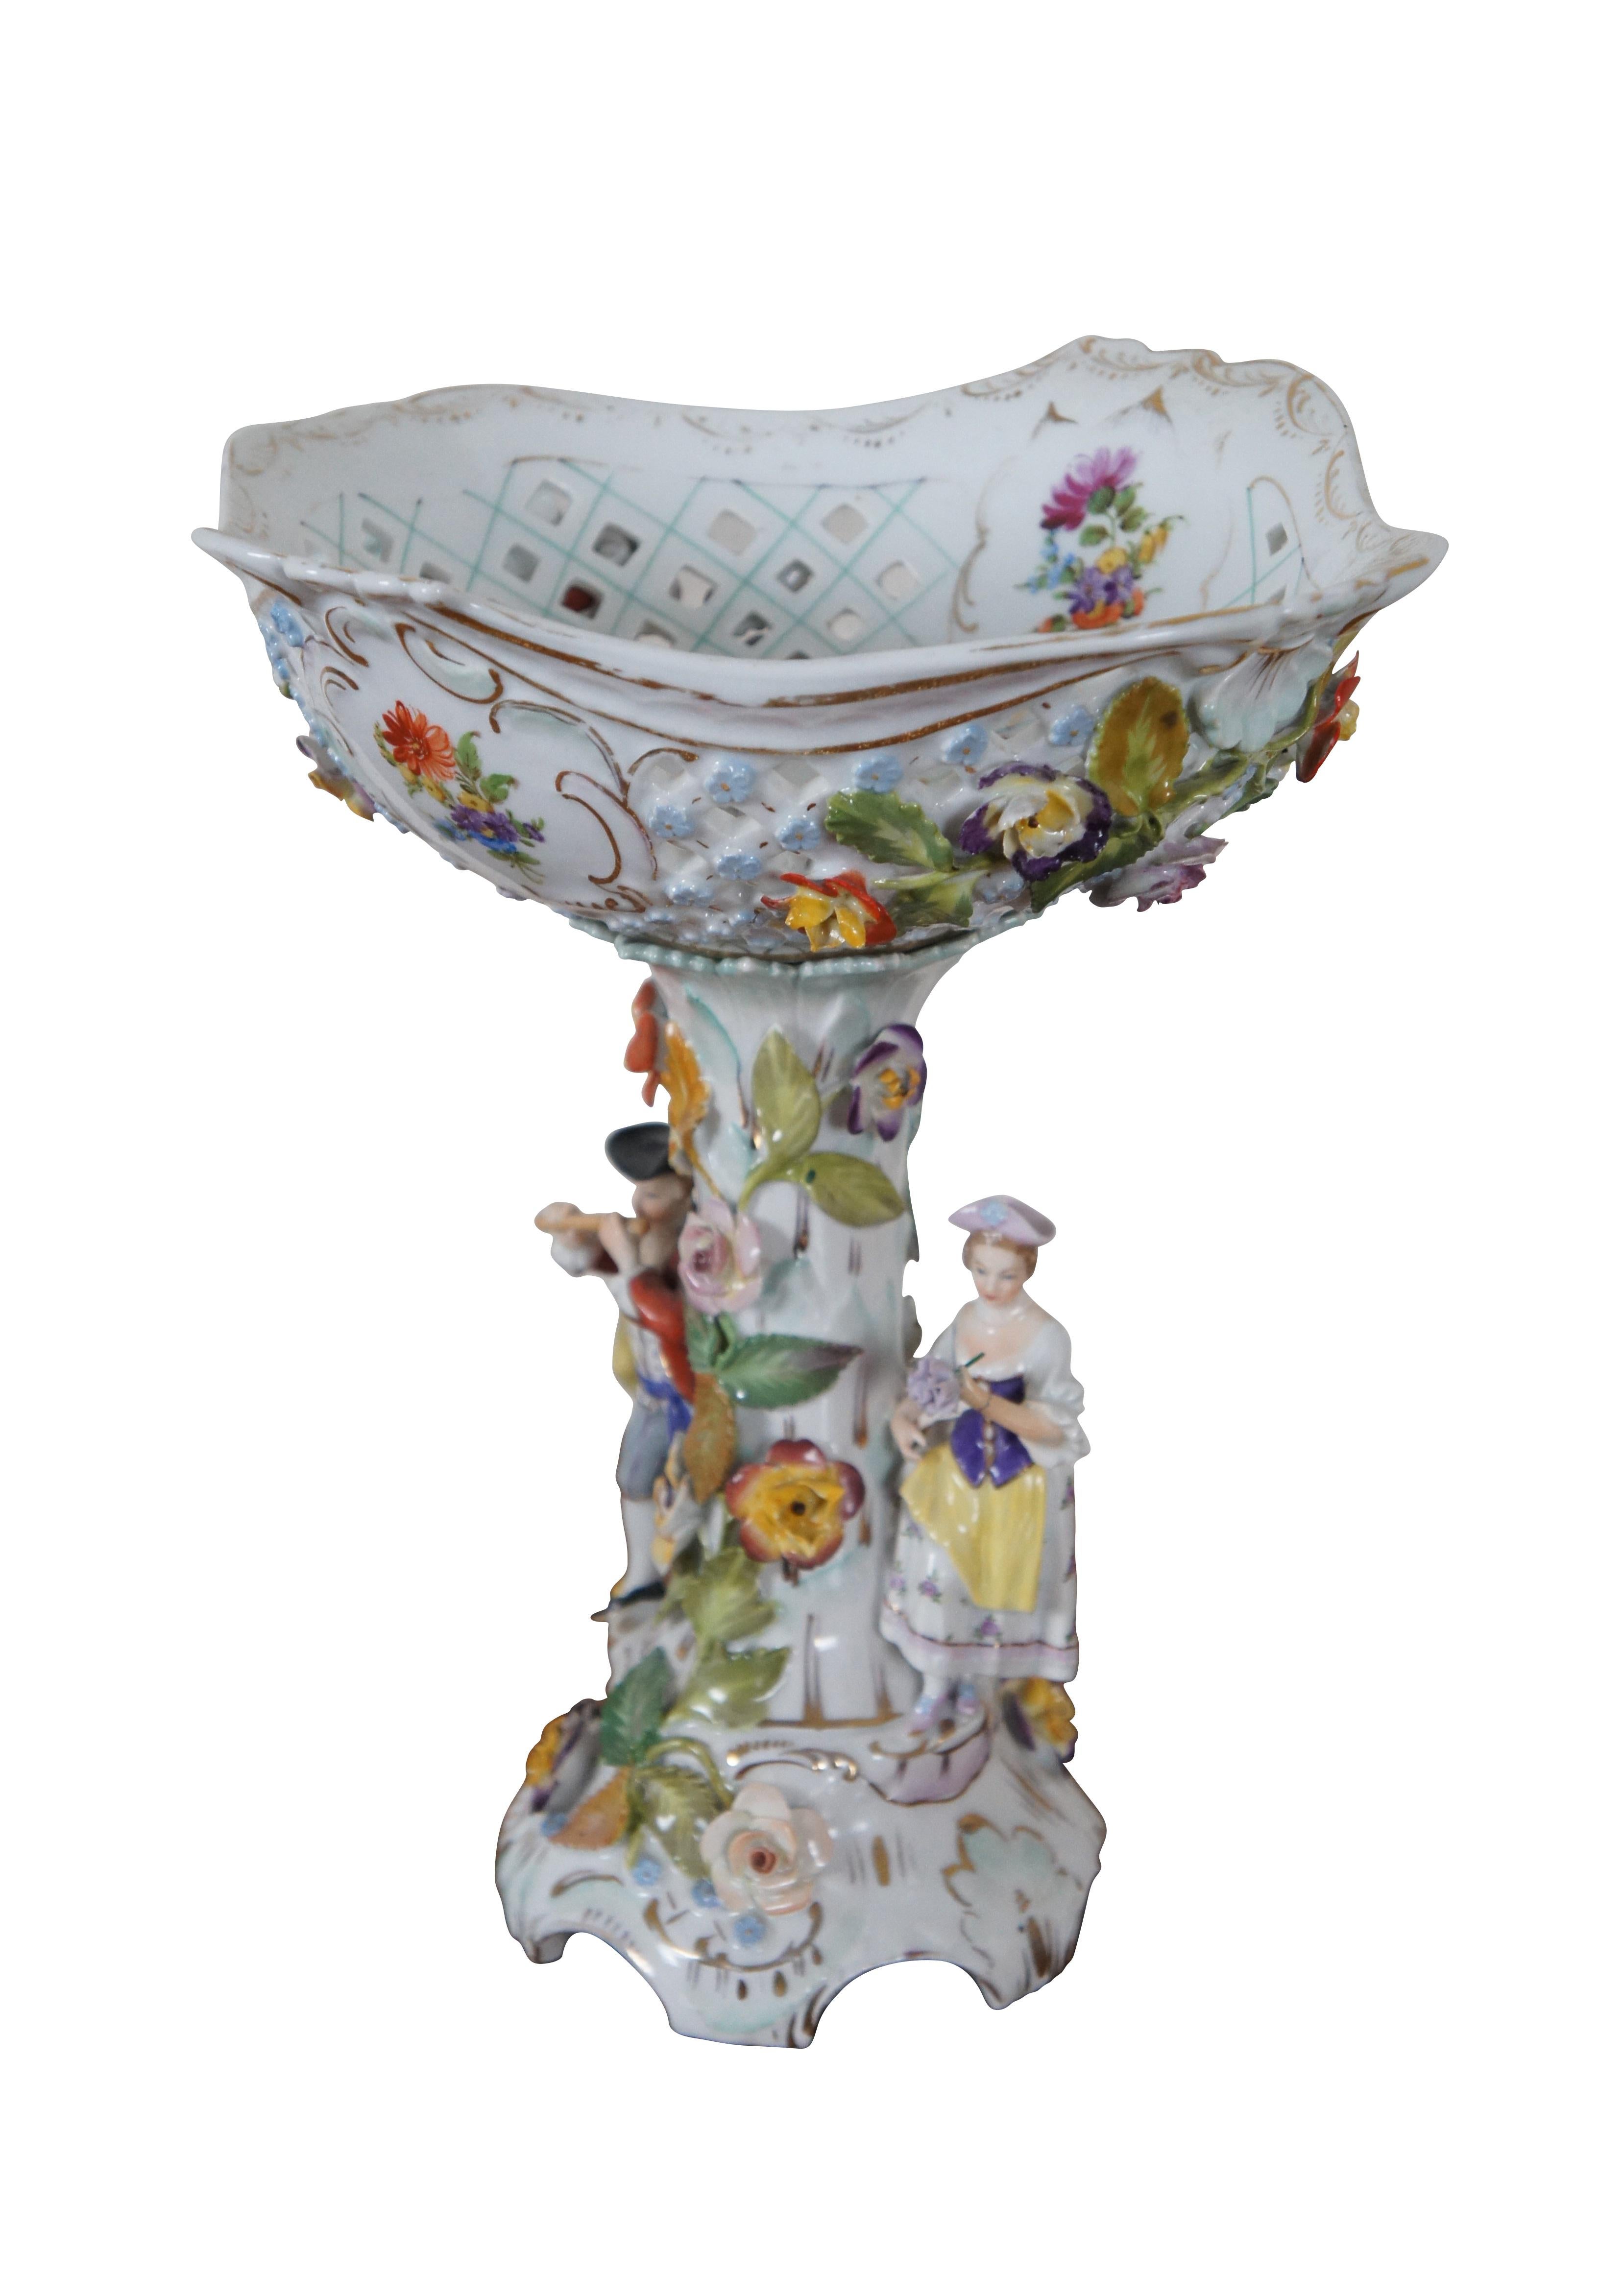 Antique Carl Thieme German Dresden centerpiece compote.  Made of porcelain featuring high relief footed base and reticulated / pierced scalloped bowl with two colonial figures, a man playing a flute and a lady holding flowers.  Circa 1902-1920.

The